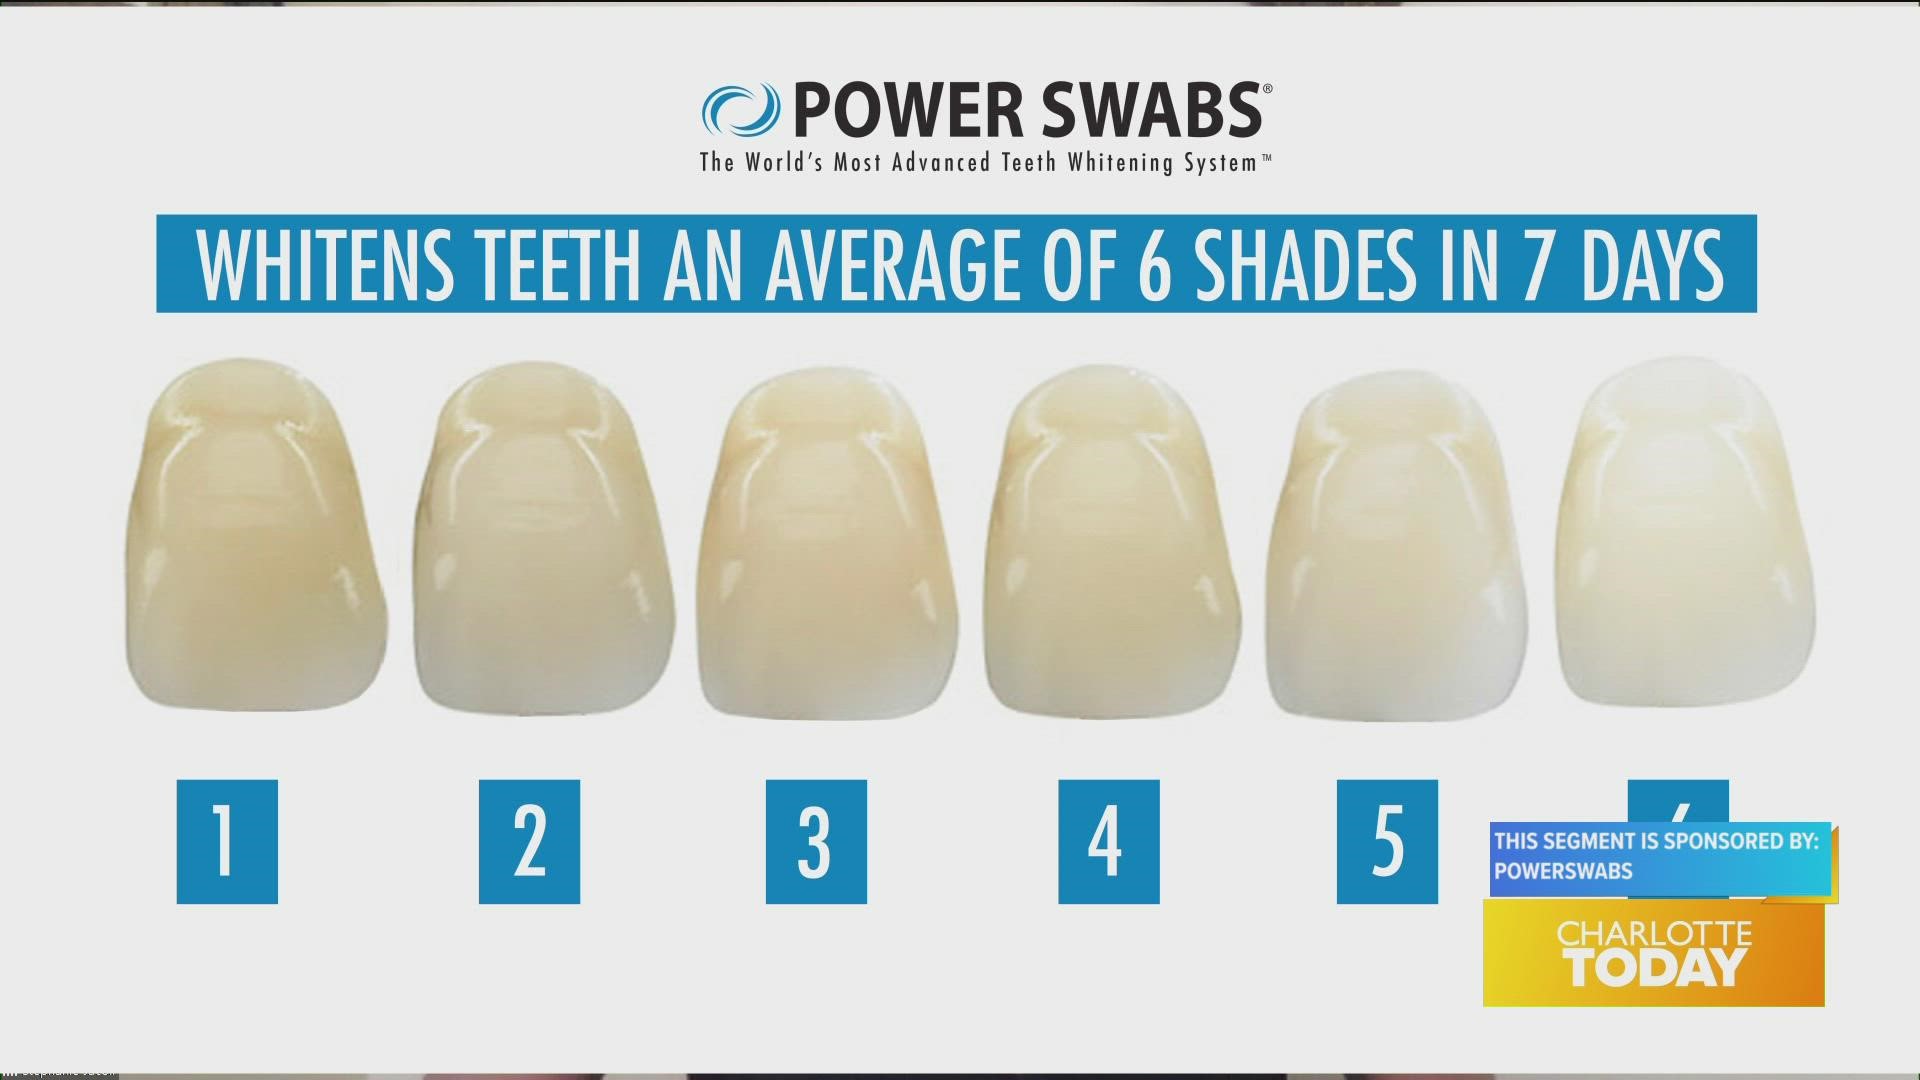 Powerswabs can make teeth up to six shades whiter in seven days